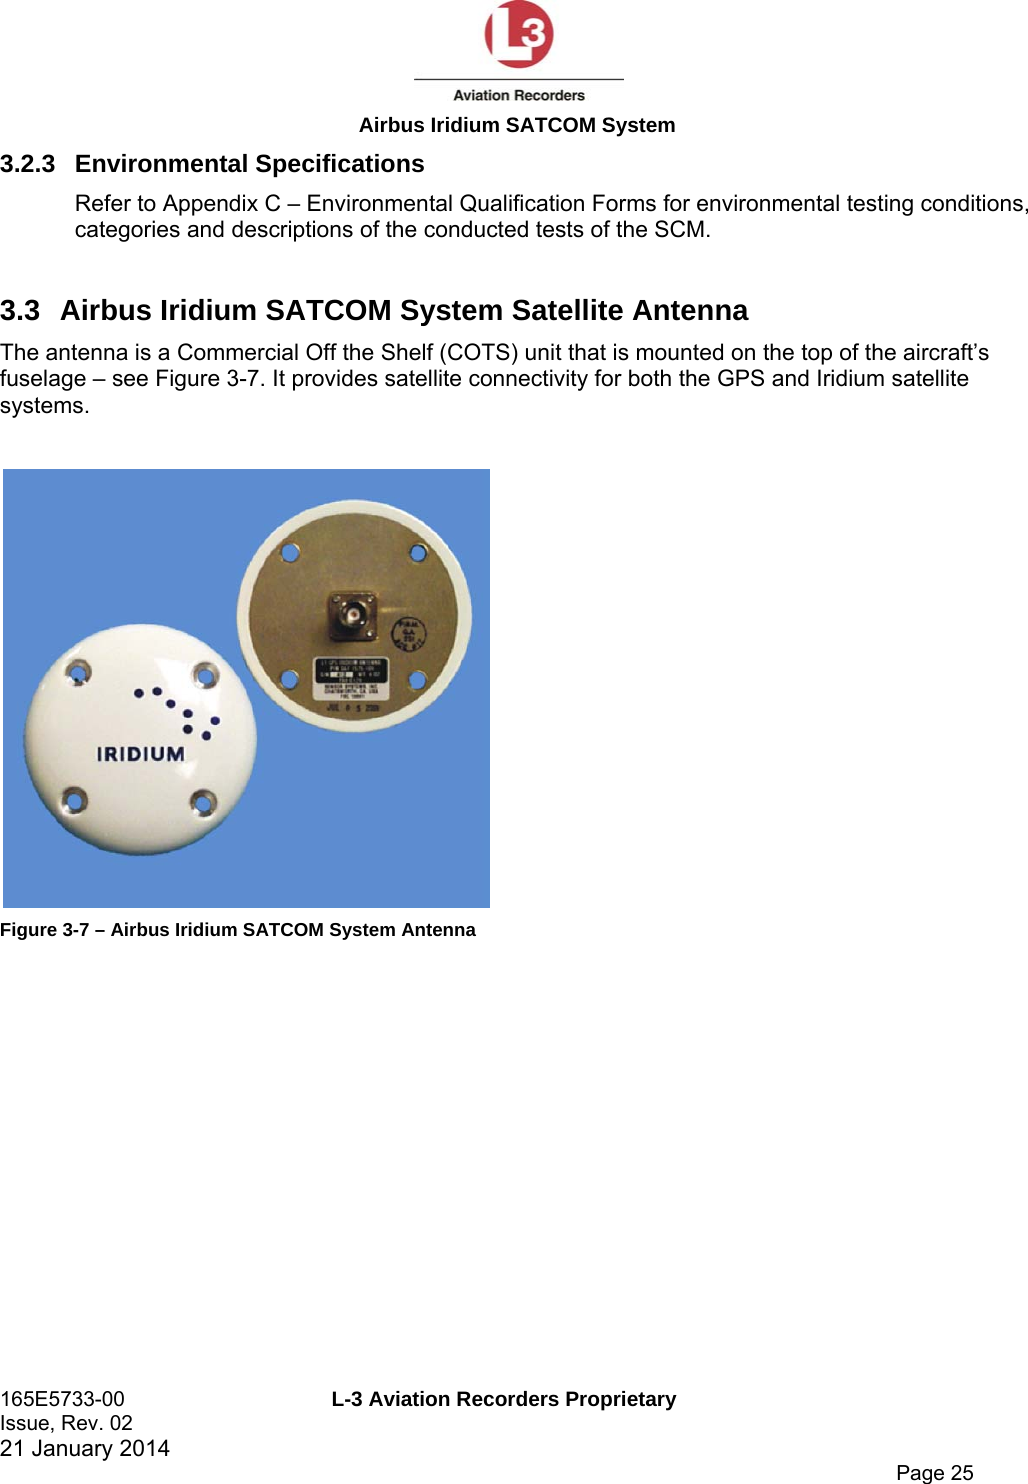  Airbus Iridium SATCOM System 165E5733-00  L-3 Aviation Recorders Proprietary Issue, Rev. 02   21 January 2014      Page 25 3.2.3 Environmental Specifications Refer to Appendix C – Environmental Qualification Forms for environmental testing conditions, categories and descriptions of the conducted tests of the SCM. 3.3 Airbus Iridium SATCOM System Satellite Antenna The antenna is a Commercial Off the Shelf (COTS) unit that is mounted on the top of the aircraft’s fuselage – see Figure 3-7. It provides satellite connectivity for both the GPS and Iridium satellite systems.   Figure 3-7 – Airbus Iridium SATCOM System Antenna   